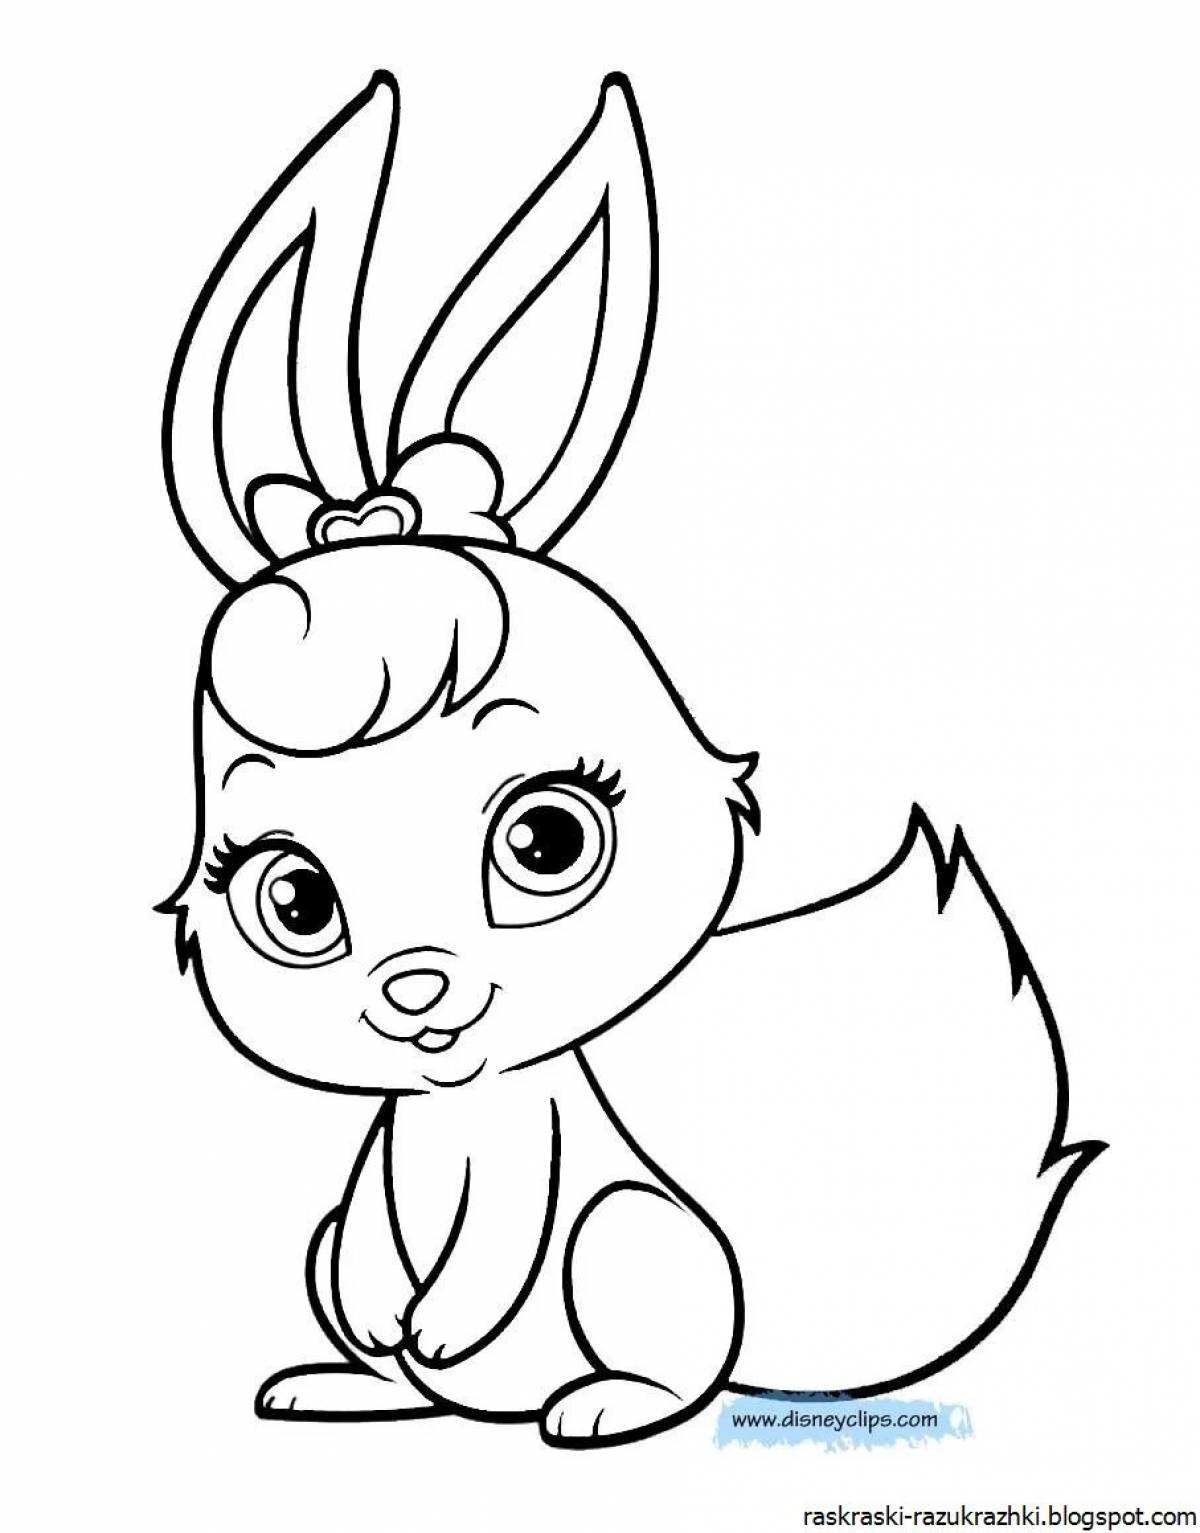 Playtime bunny coloring book